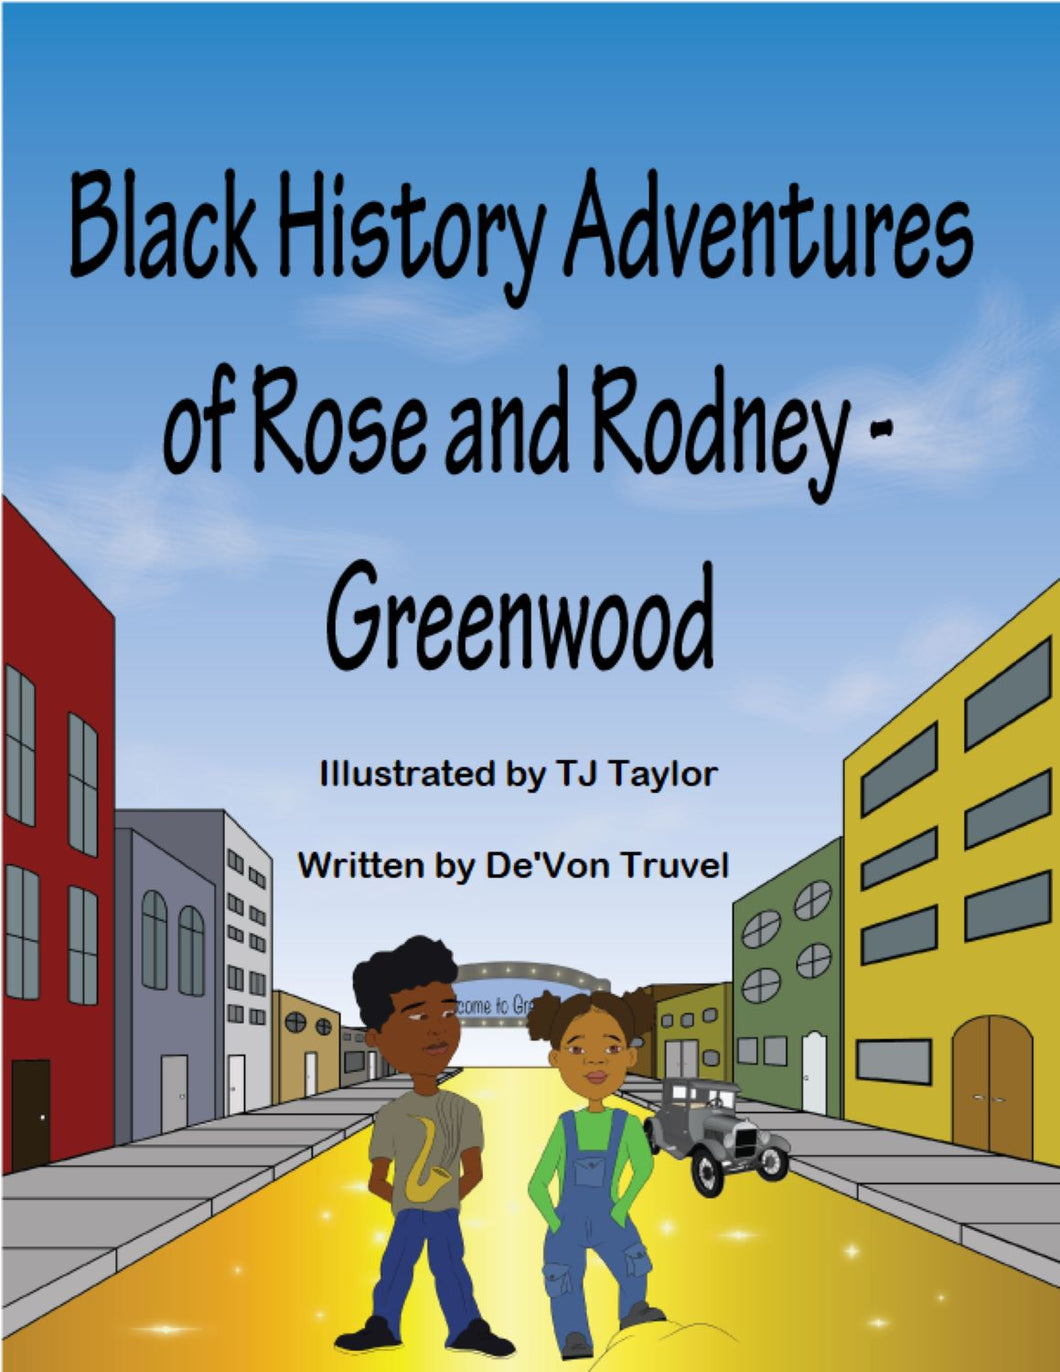 Black History Adventures of Rose and Rodney - Greenwood